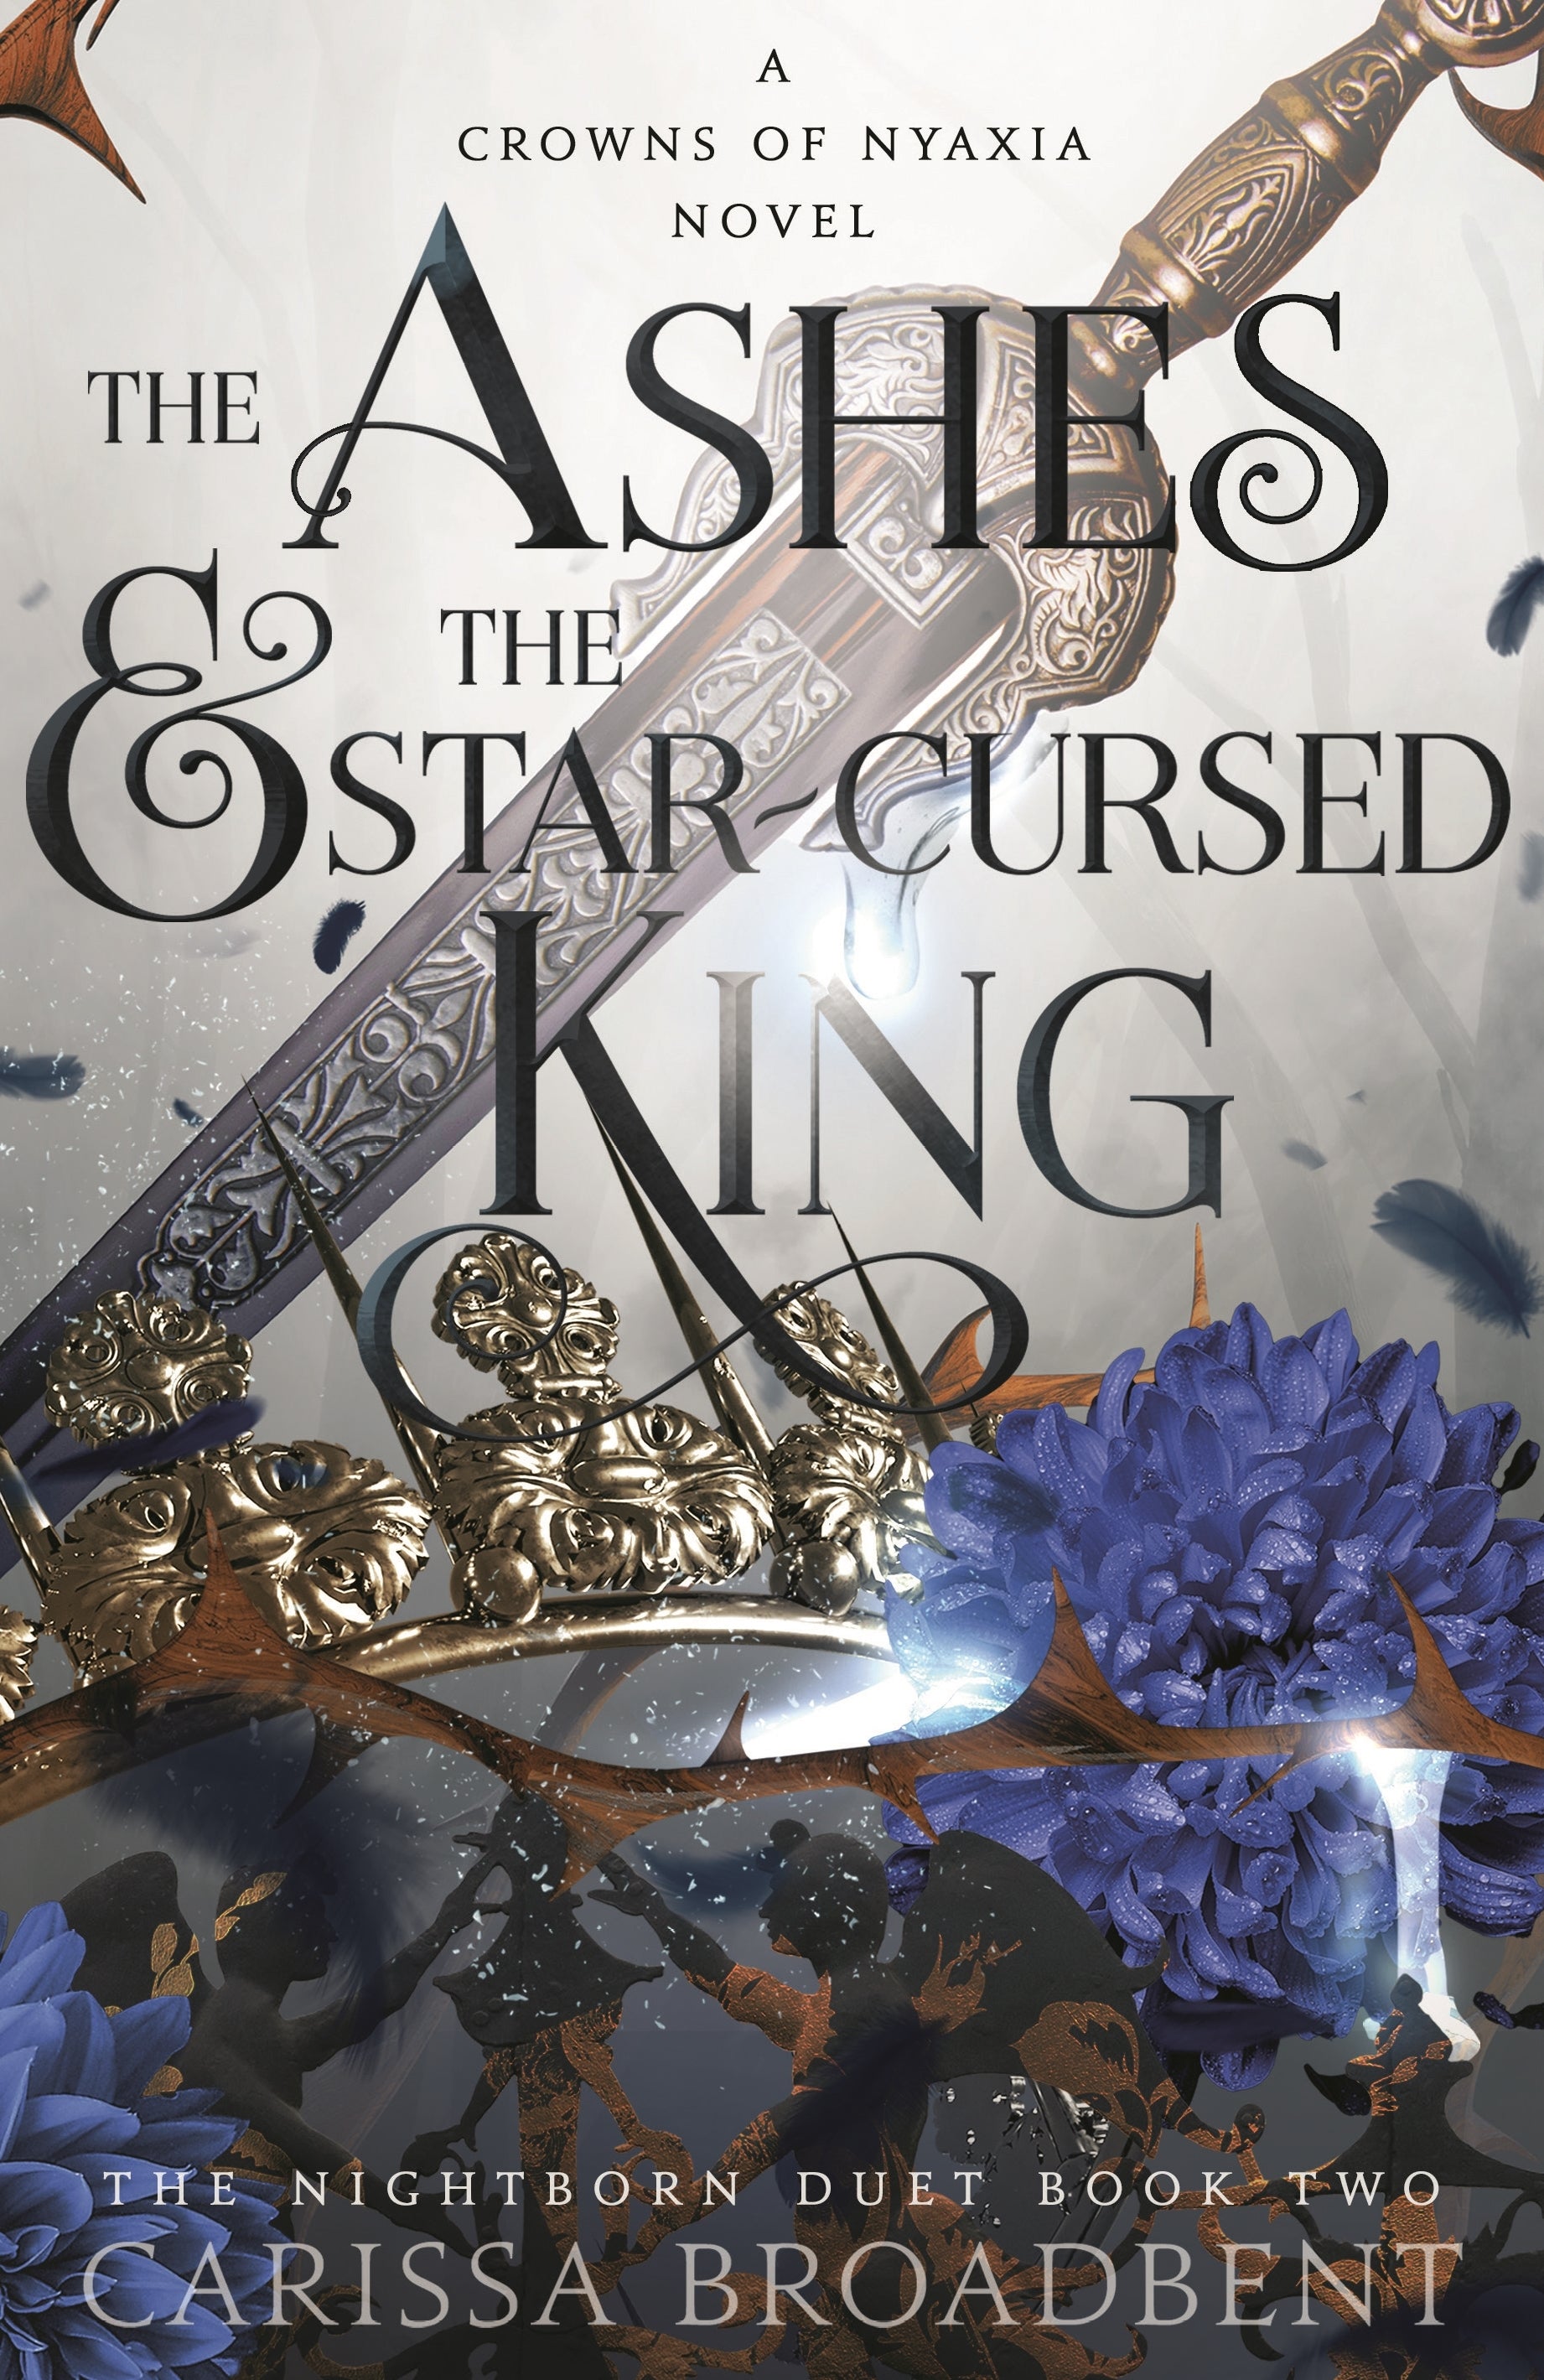 The Ashes And The Star - Cursed King by Carissa Broadbent